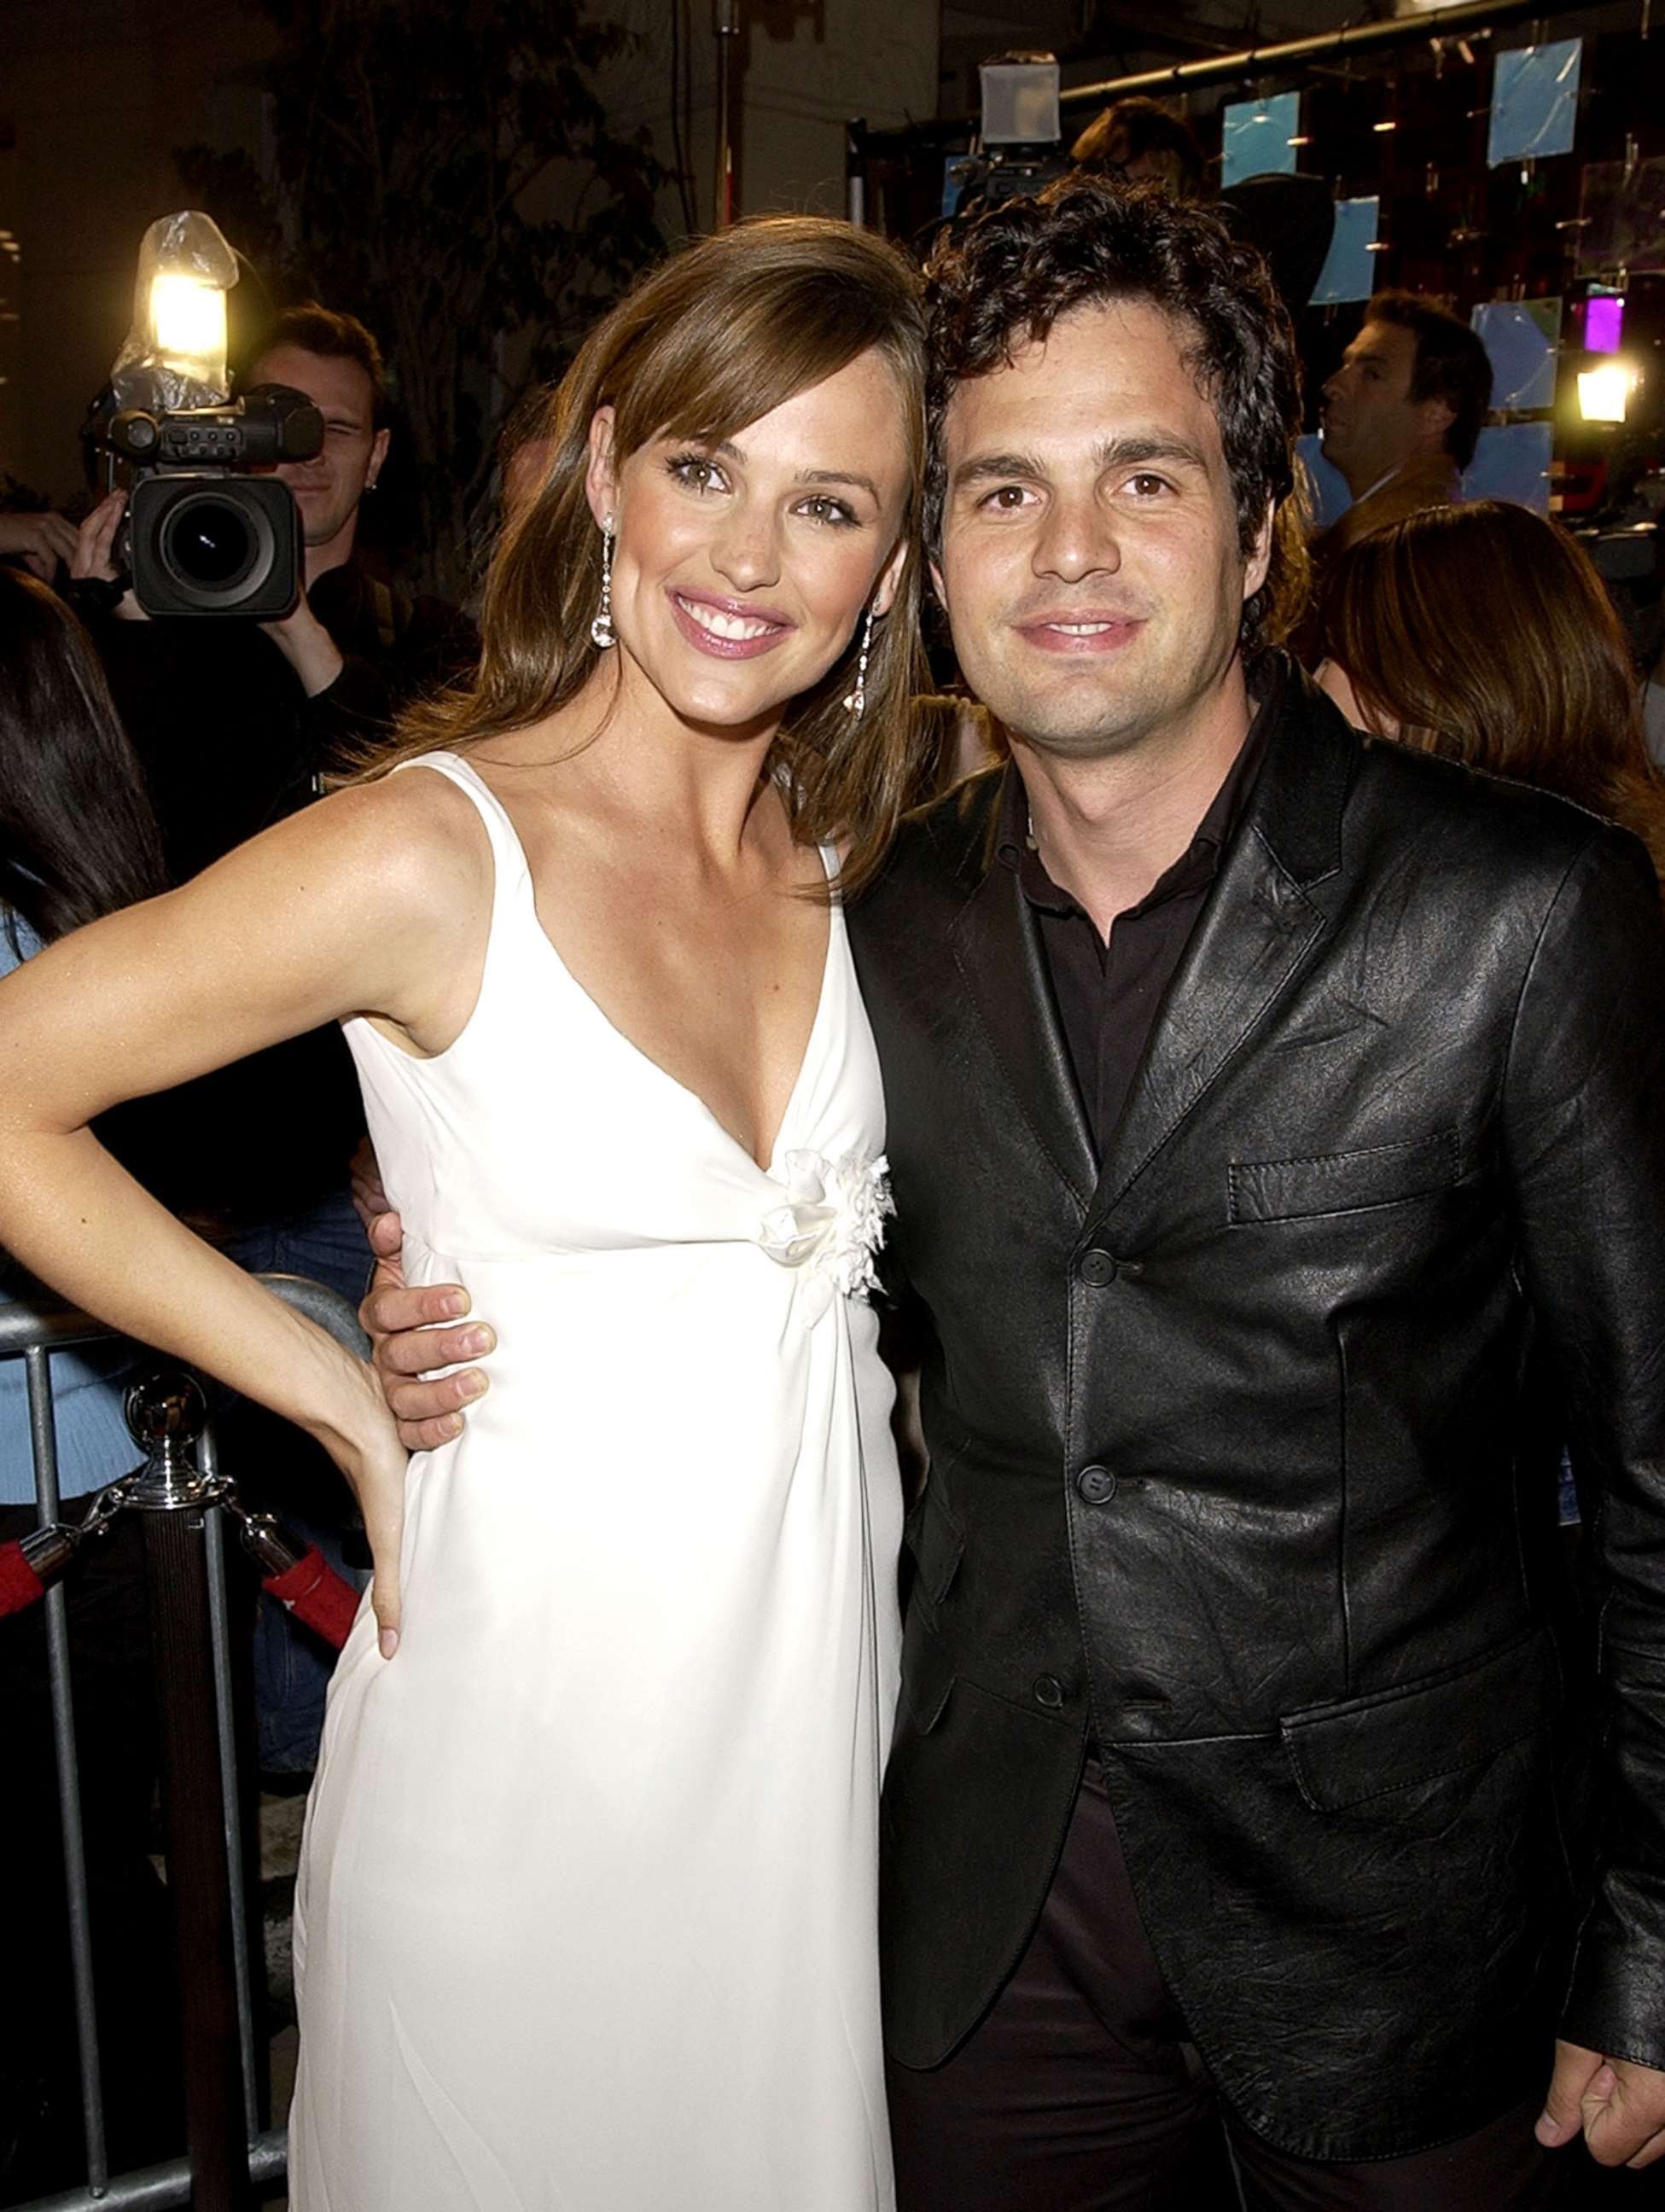 PHOTO: Jennifer Garner and Mark Ruffalo during "13 Going on 30" Premiere, April 14, 2004, in Westwood, Calif.